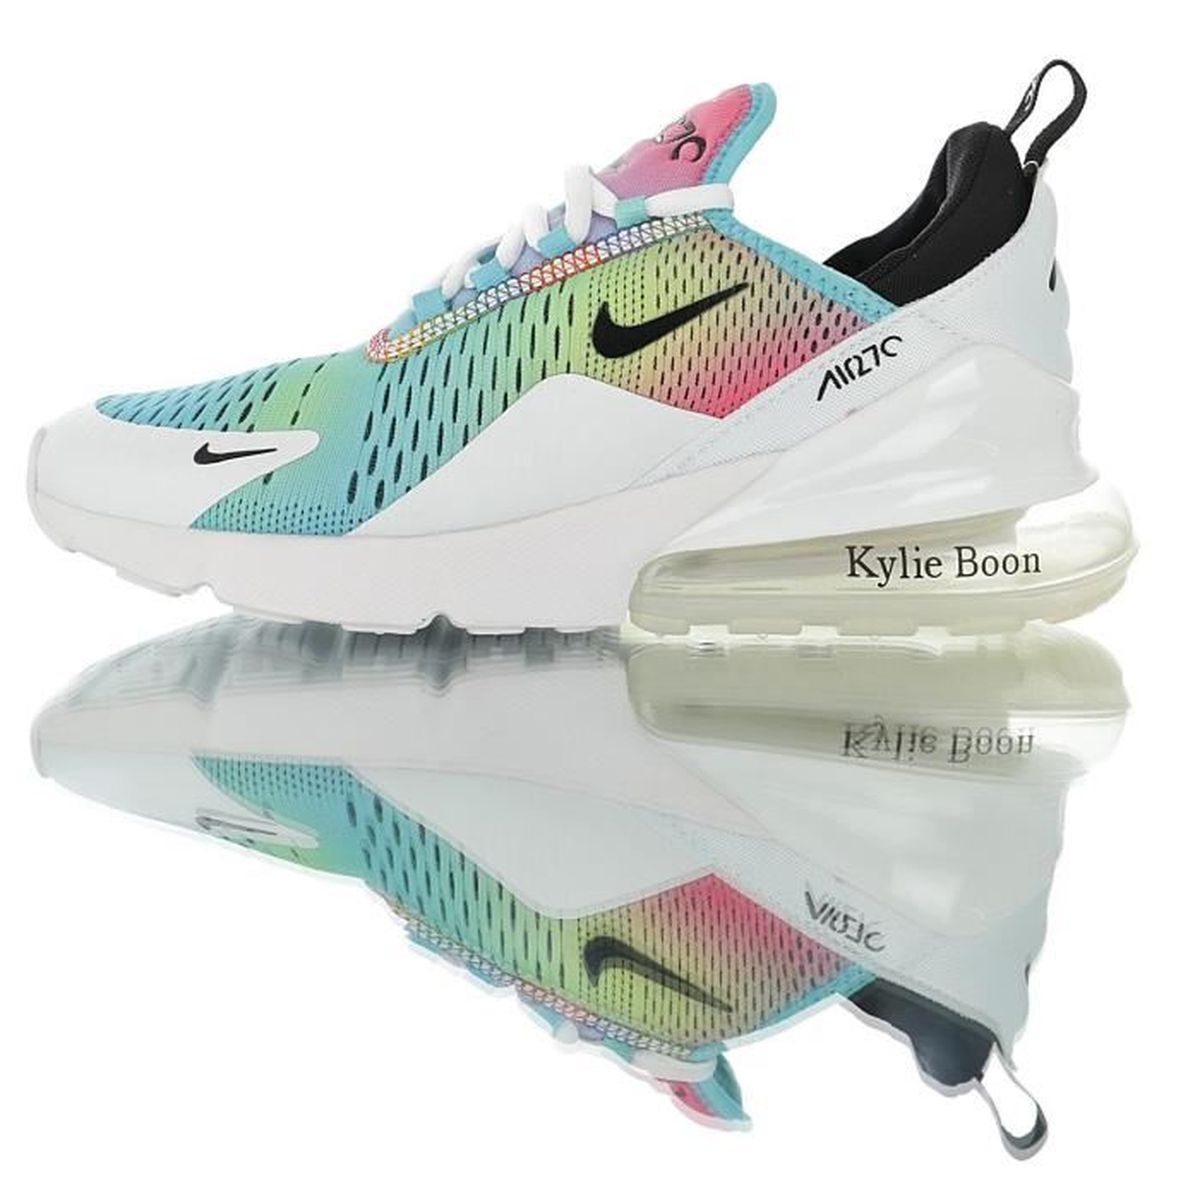 Correctly Beg for Nike Baskets Air Max 270 Chaussures de Course femme blanc Blanc Blance -  Cdiscount Chaussures